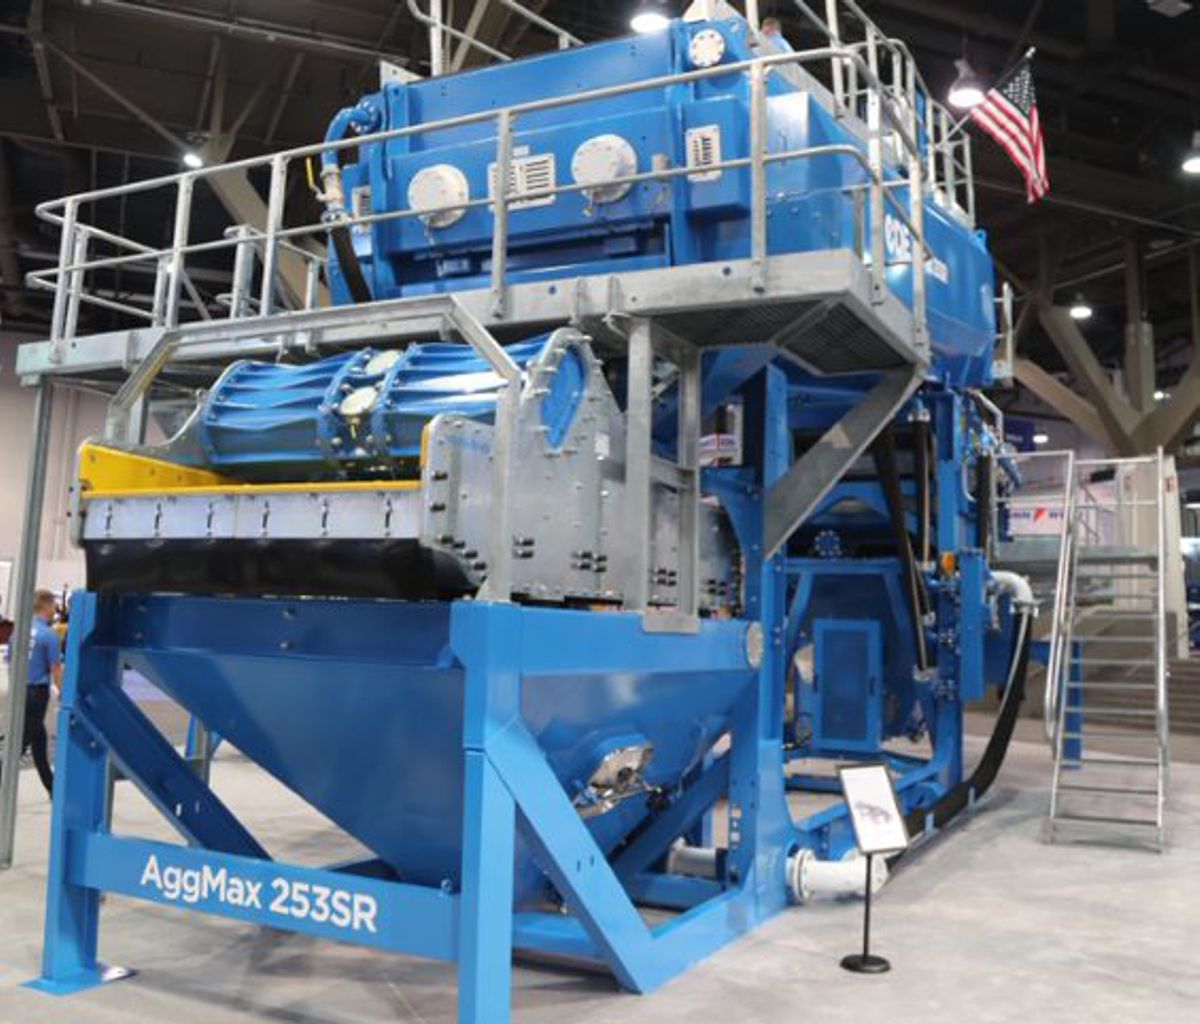 CDE showcase The Future of Waste Recycling with next-gen equipment at Conexpo